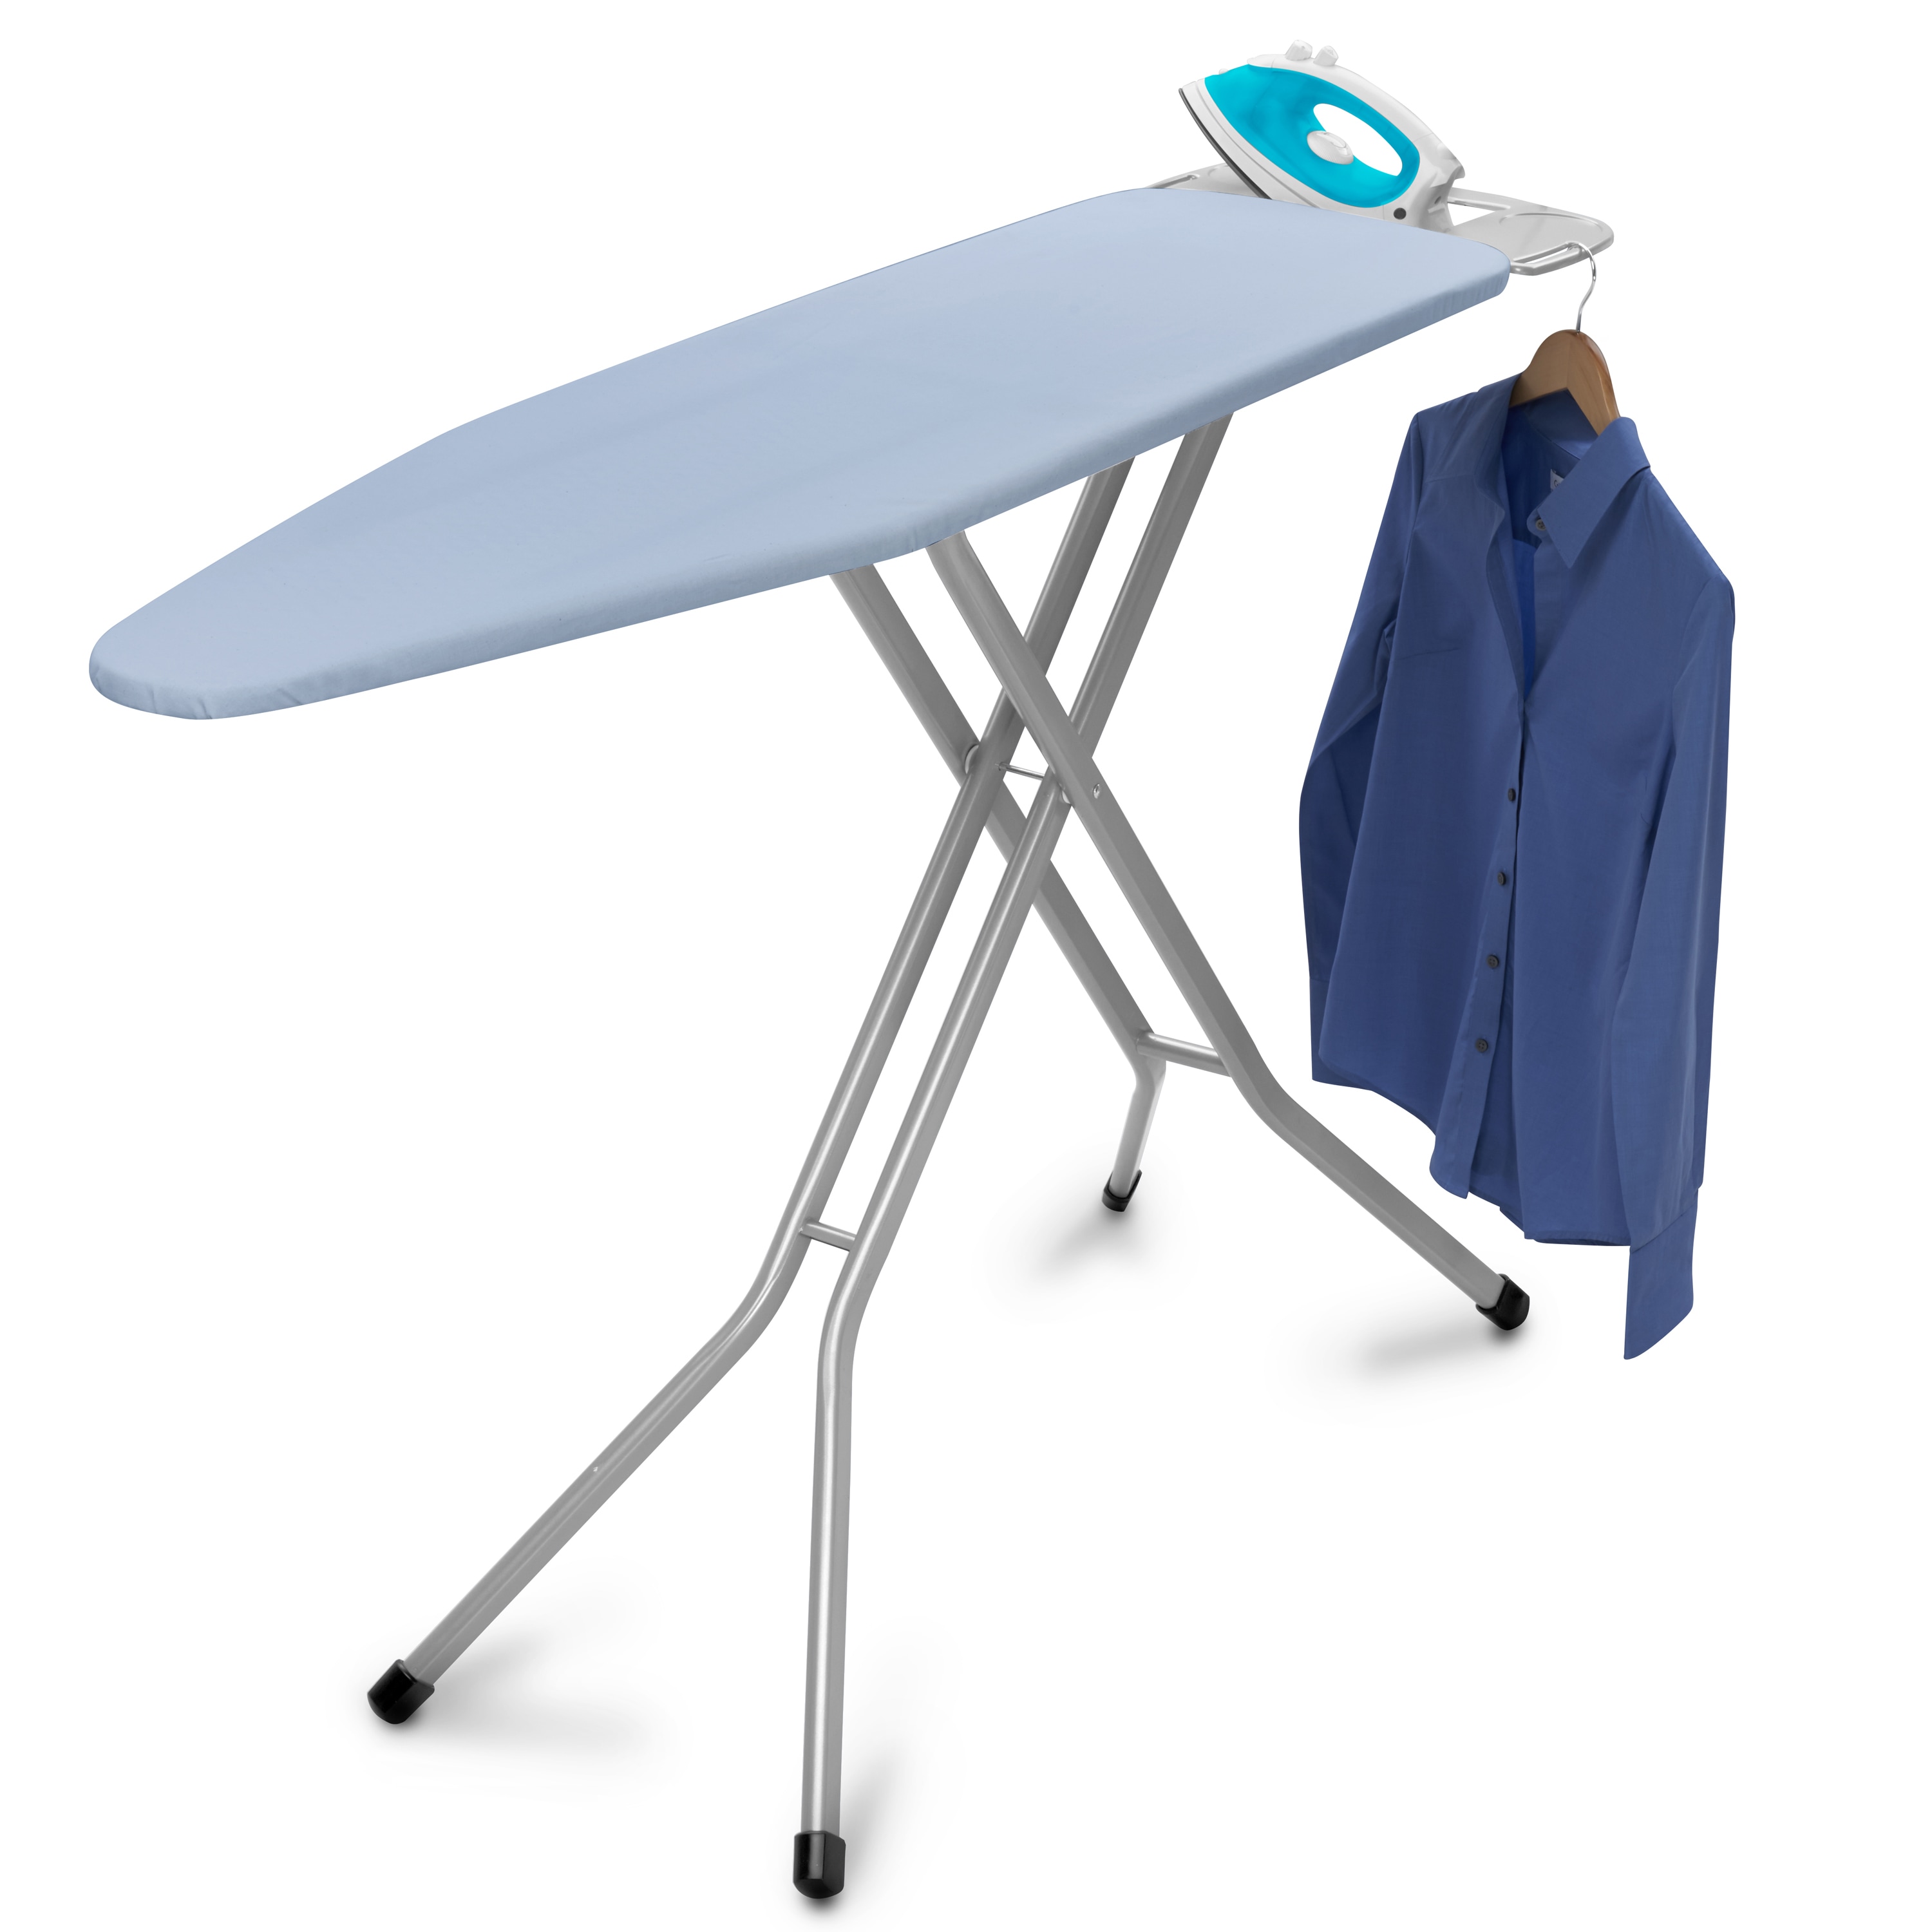 Homz Products Blue Freestanding Folding Ironing Board (54-in x 14